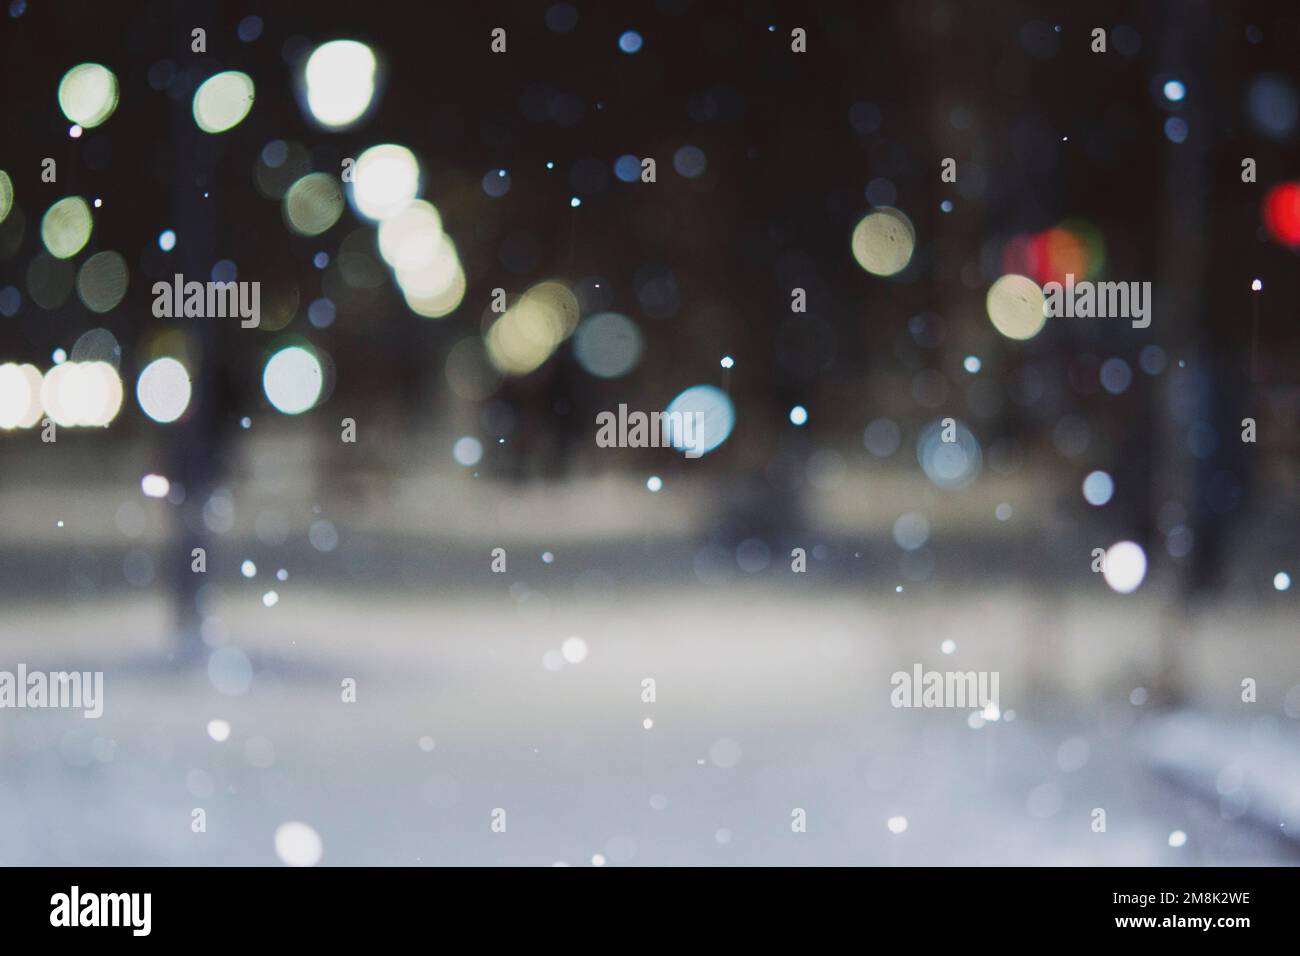 Blurred background. City view, lights, falling snow, night, street, bokeh spots of headlights of moving cars. Diffuse Urban backdrop winter scenery of street in city at night. Lantern light, snowfall Stock Photo